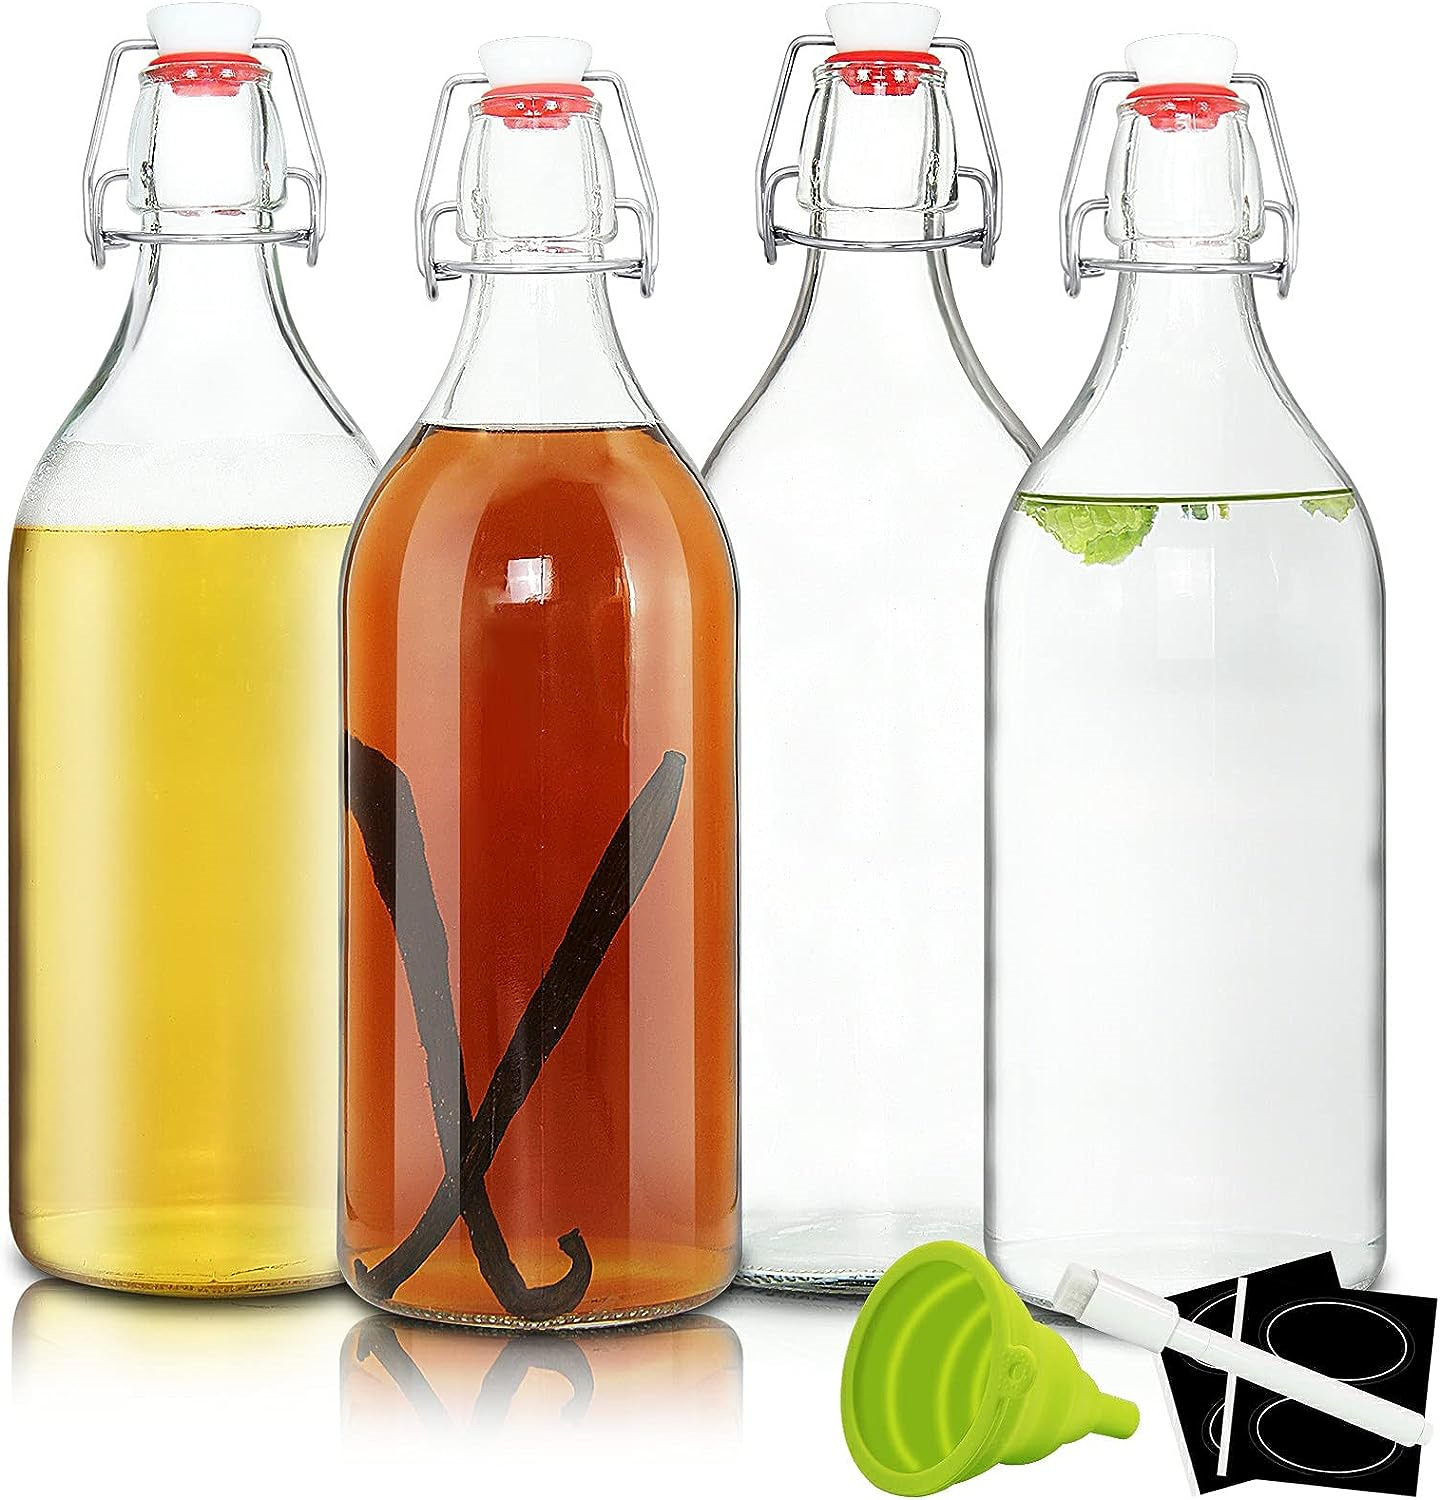 32oz Swing Top Bottles -Glass Beer Bottle with Airtight Rubber Seal Flip Caps...